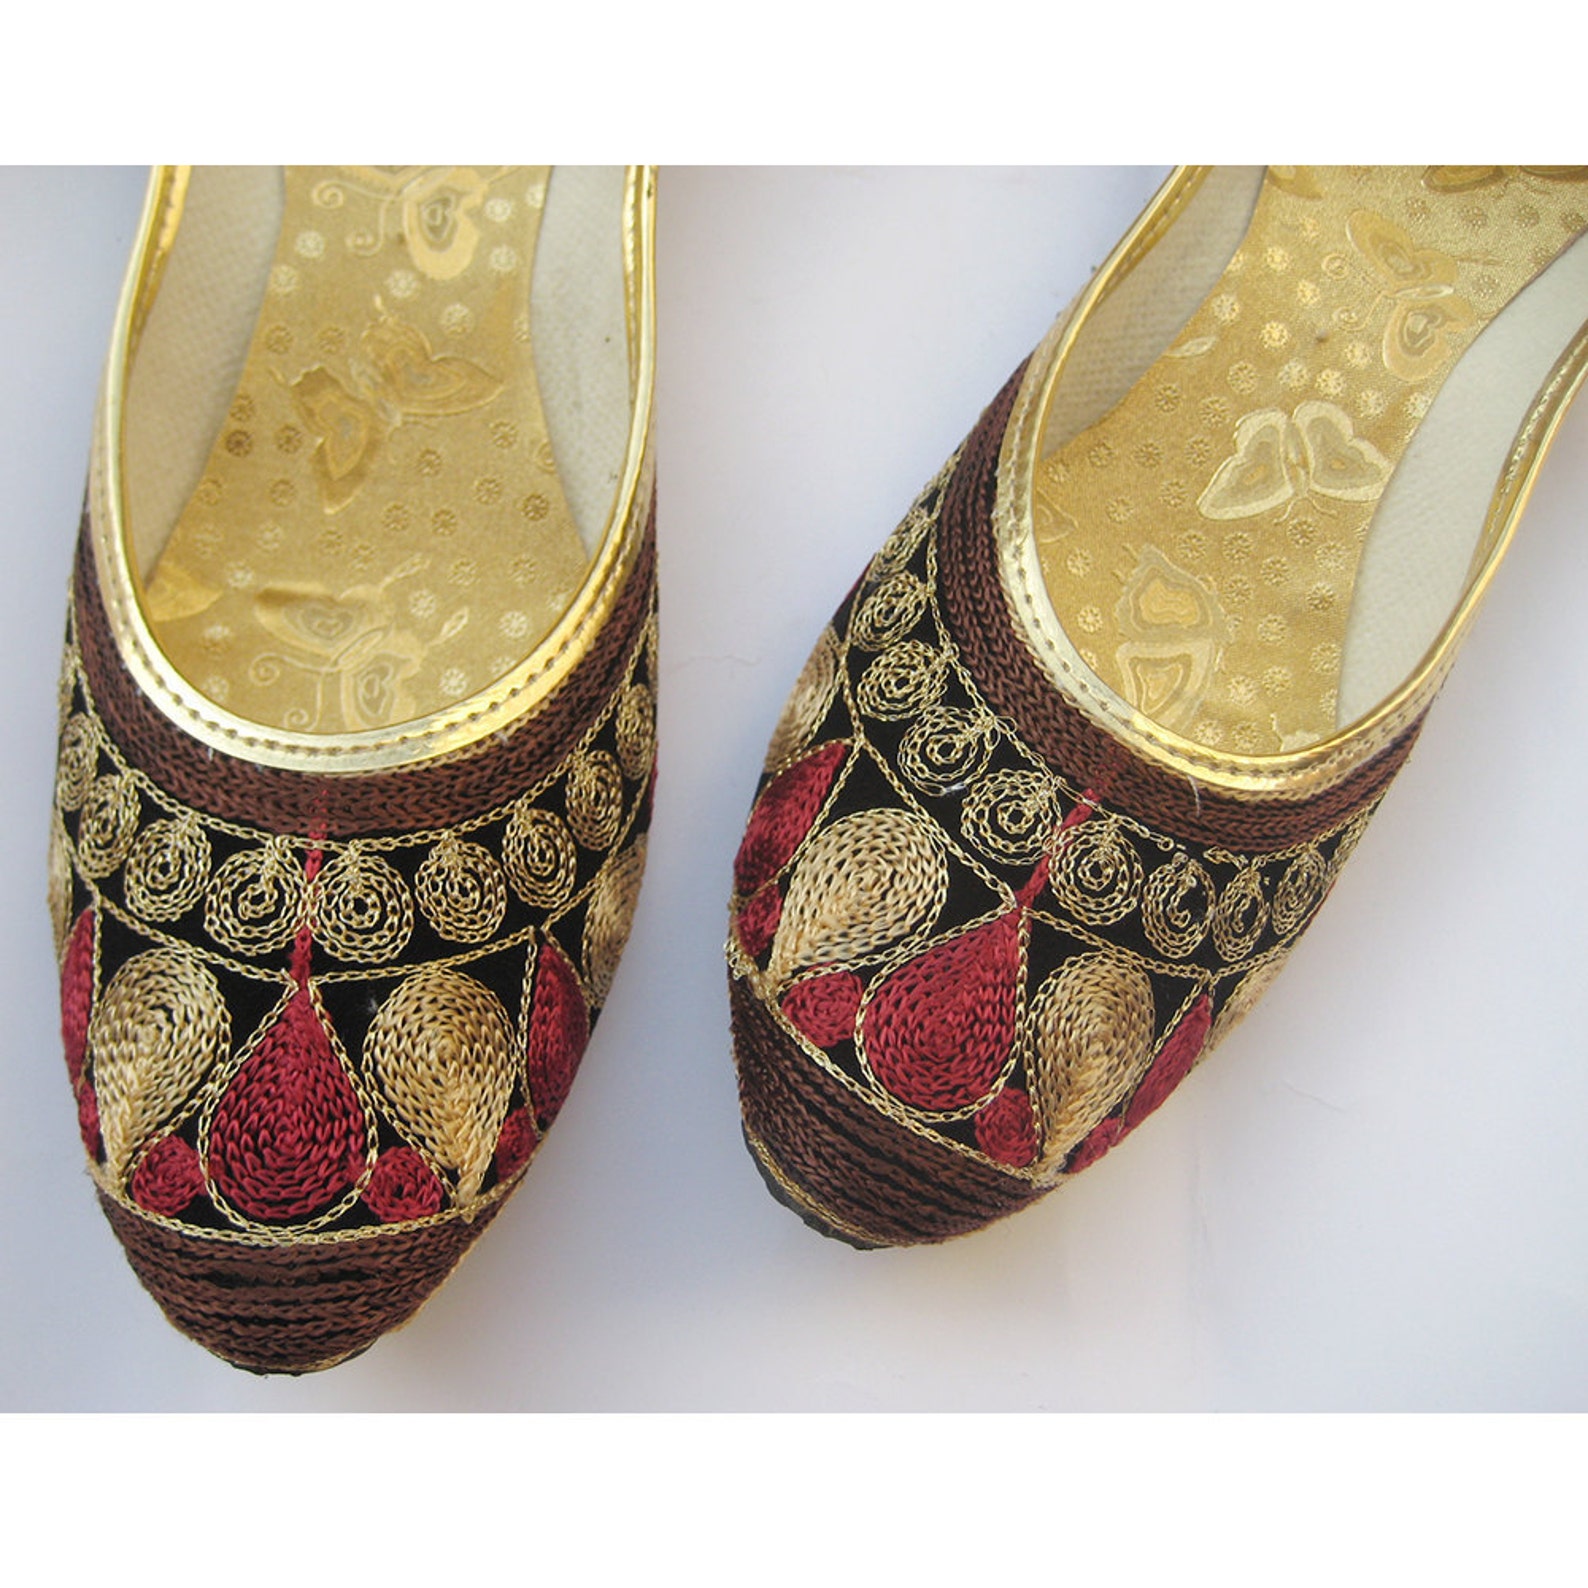 us size 8.5 - deep red women flat shoes, multi color ballet flats, red embroidery shoes, women slip on shoes, ethnic shoes, indi